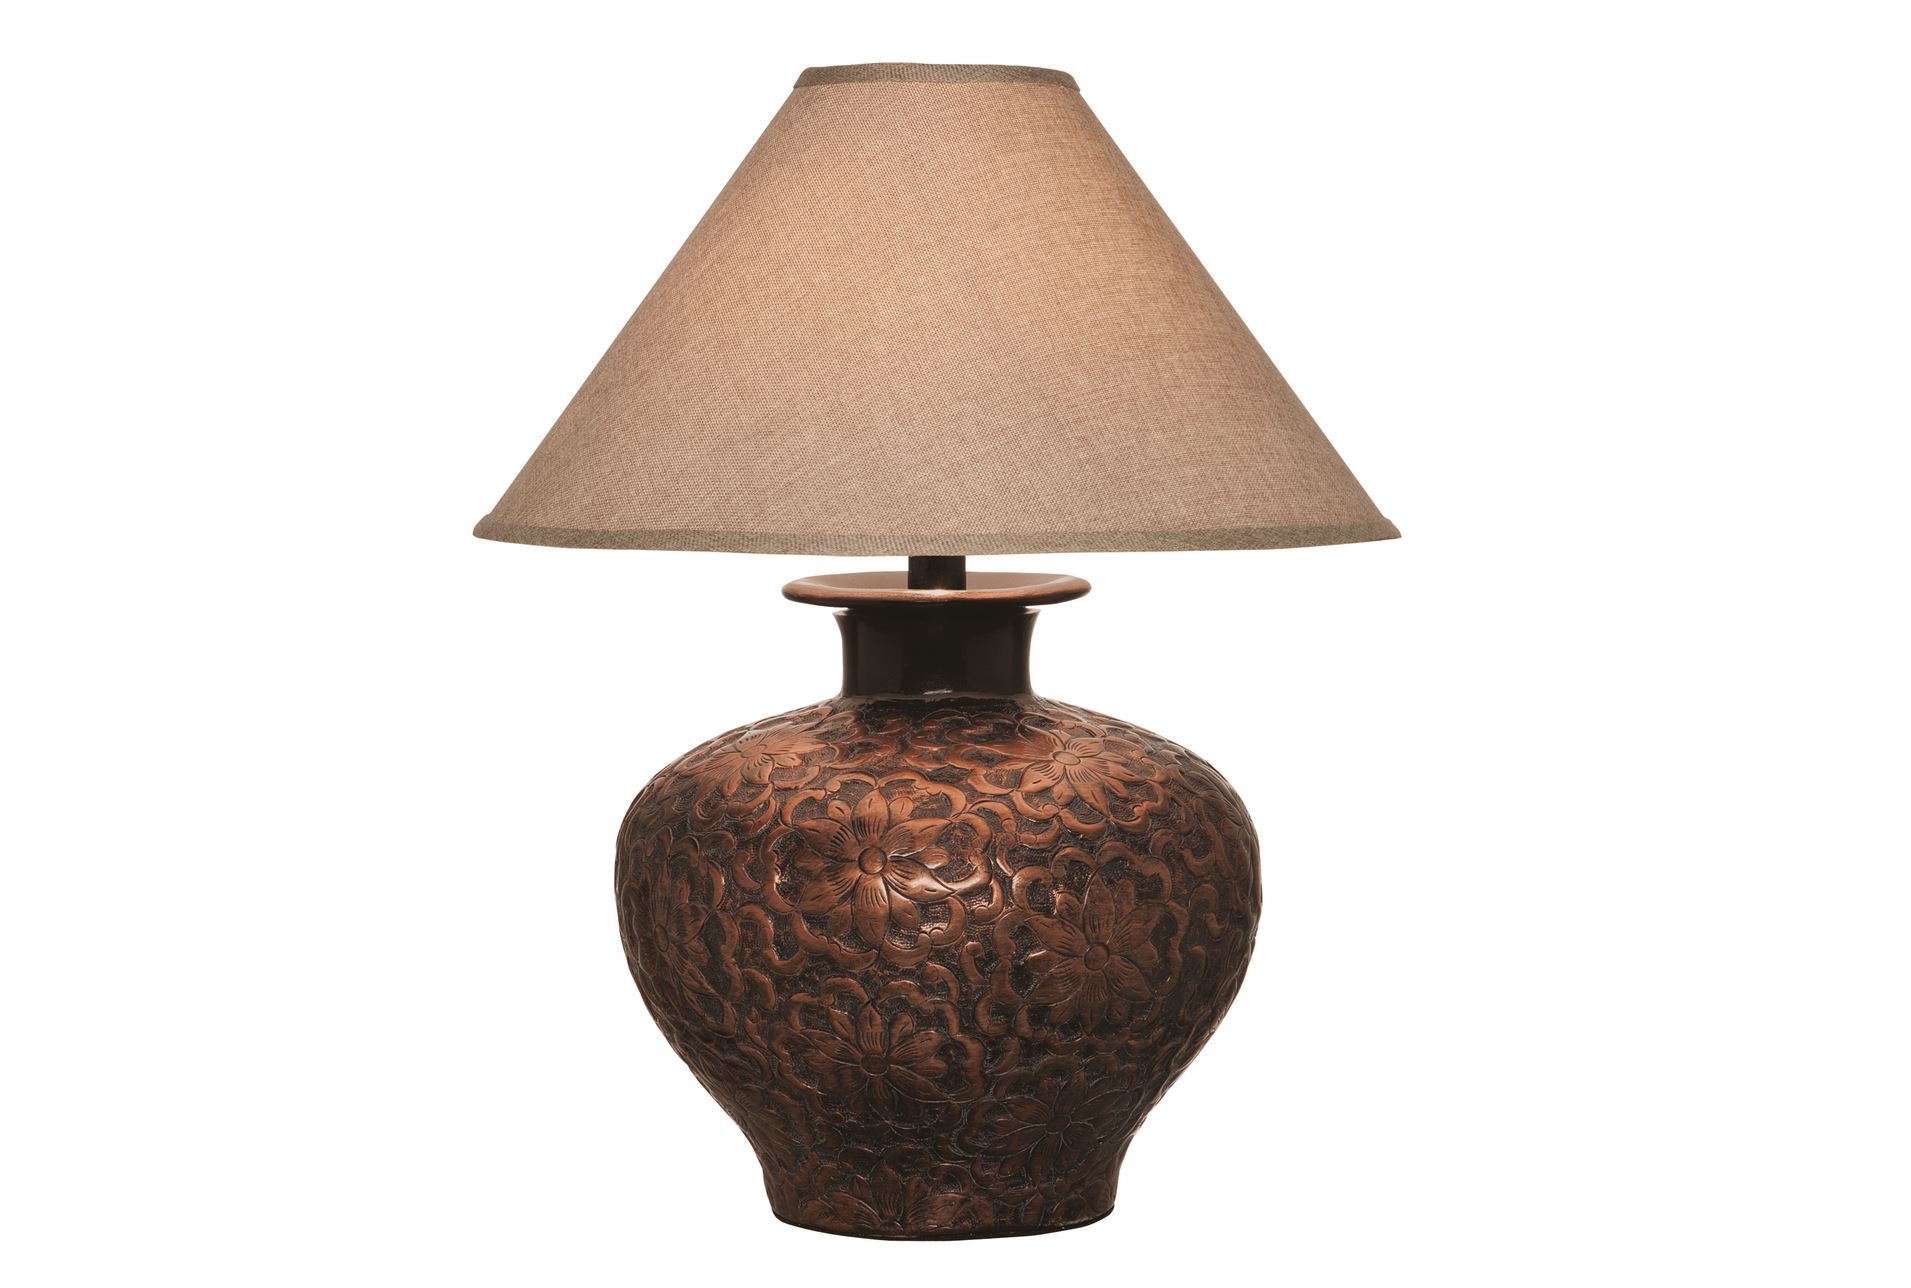 Hammered copper table lamps